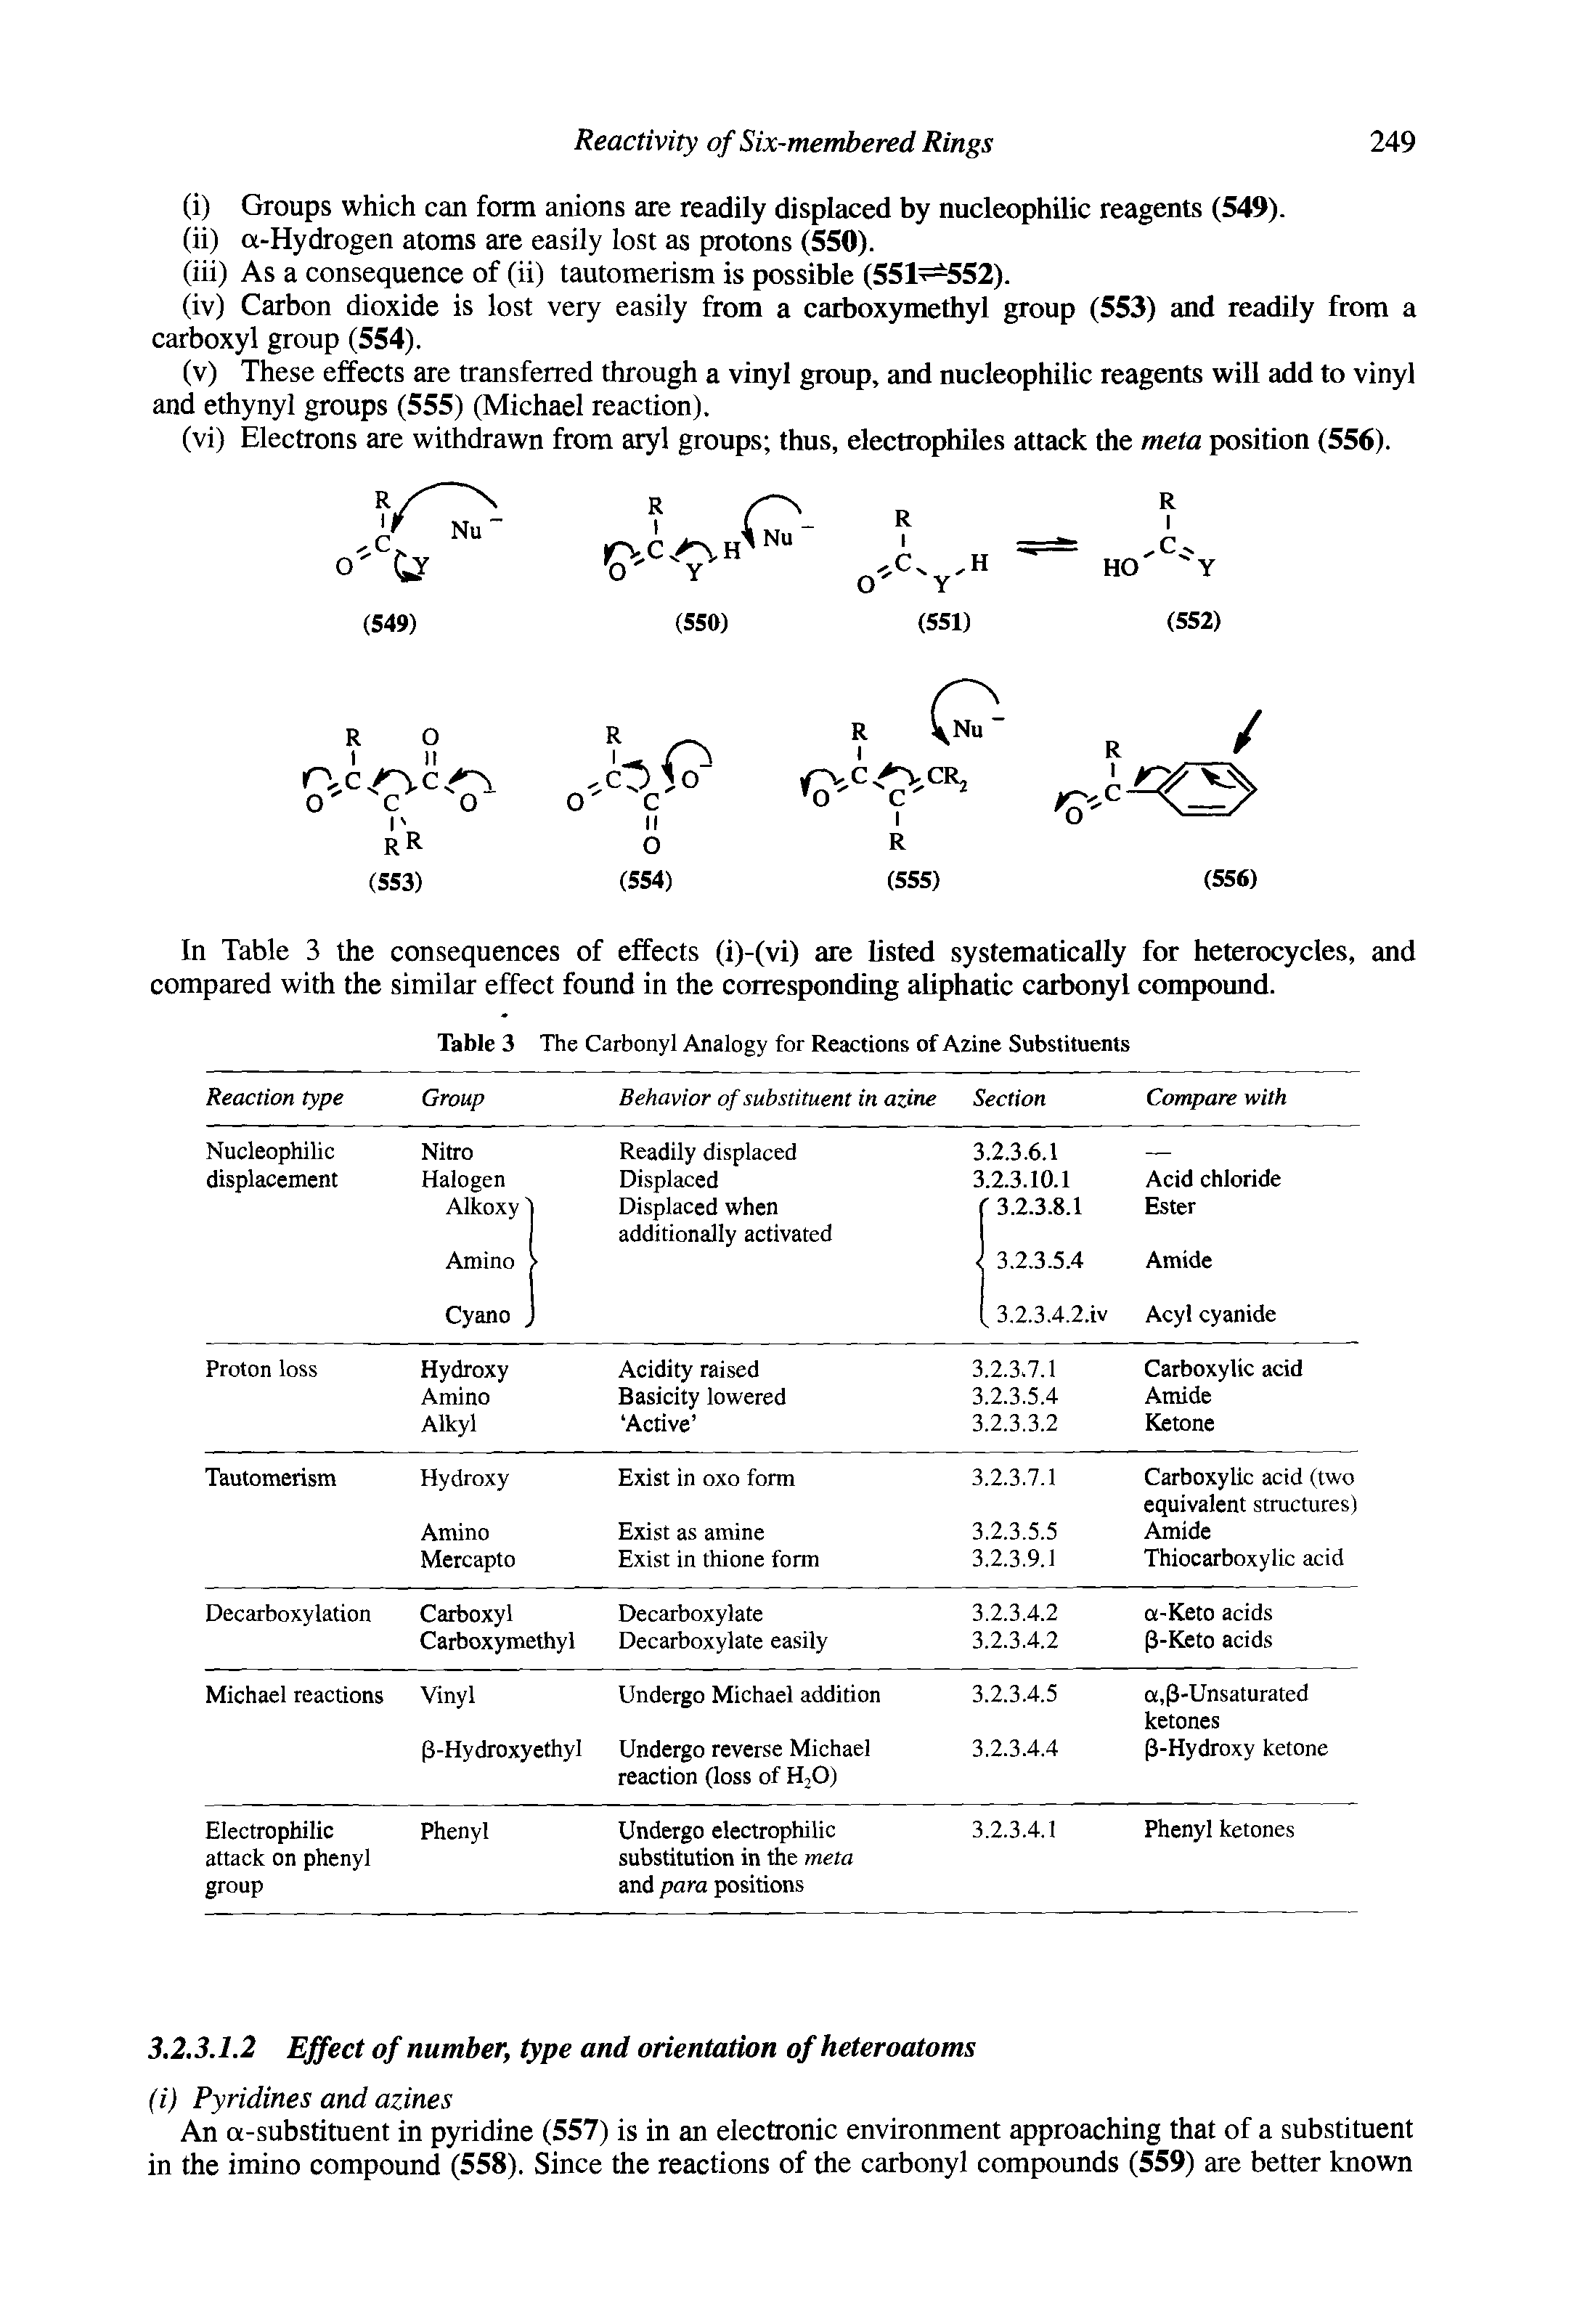 Table 3 The Carbonyl Analogy for Reactions of Azine Substituents...